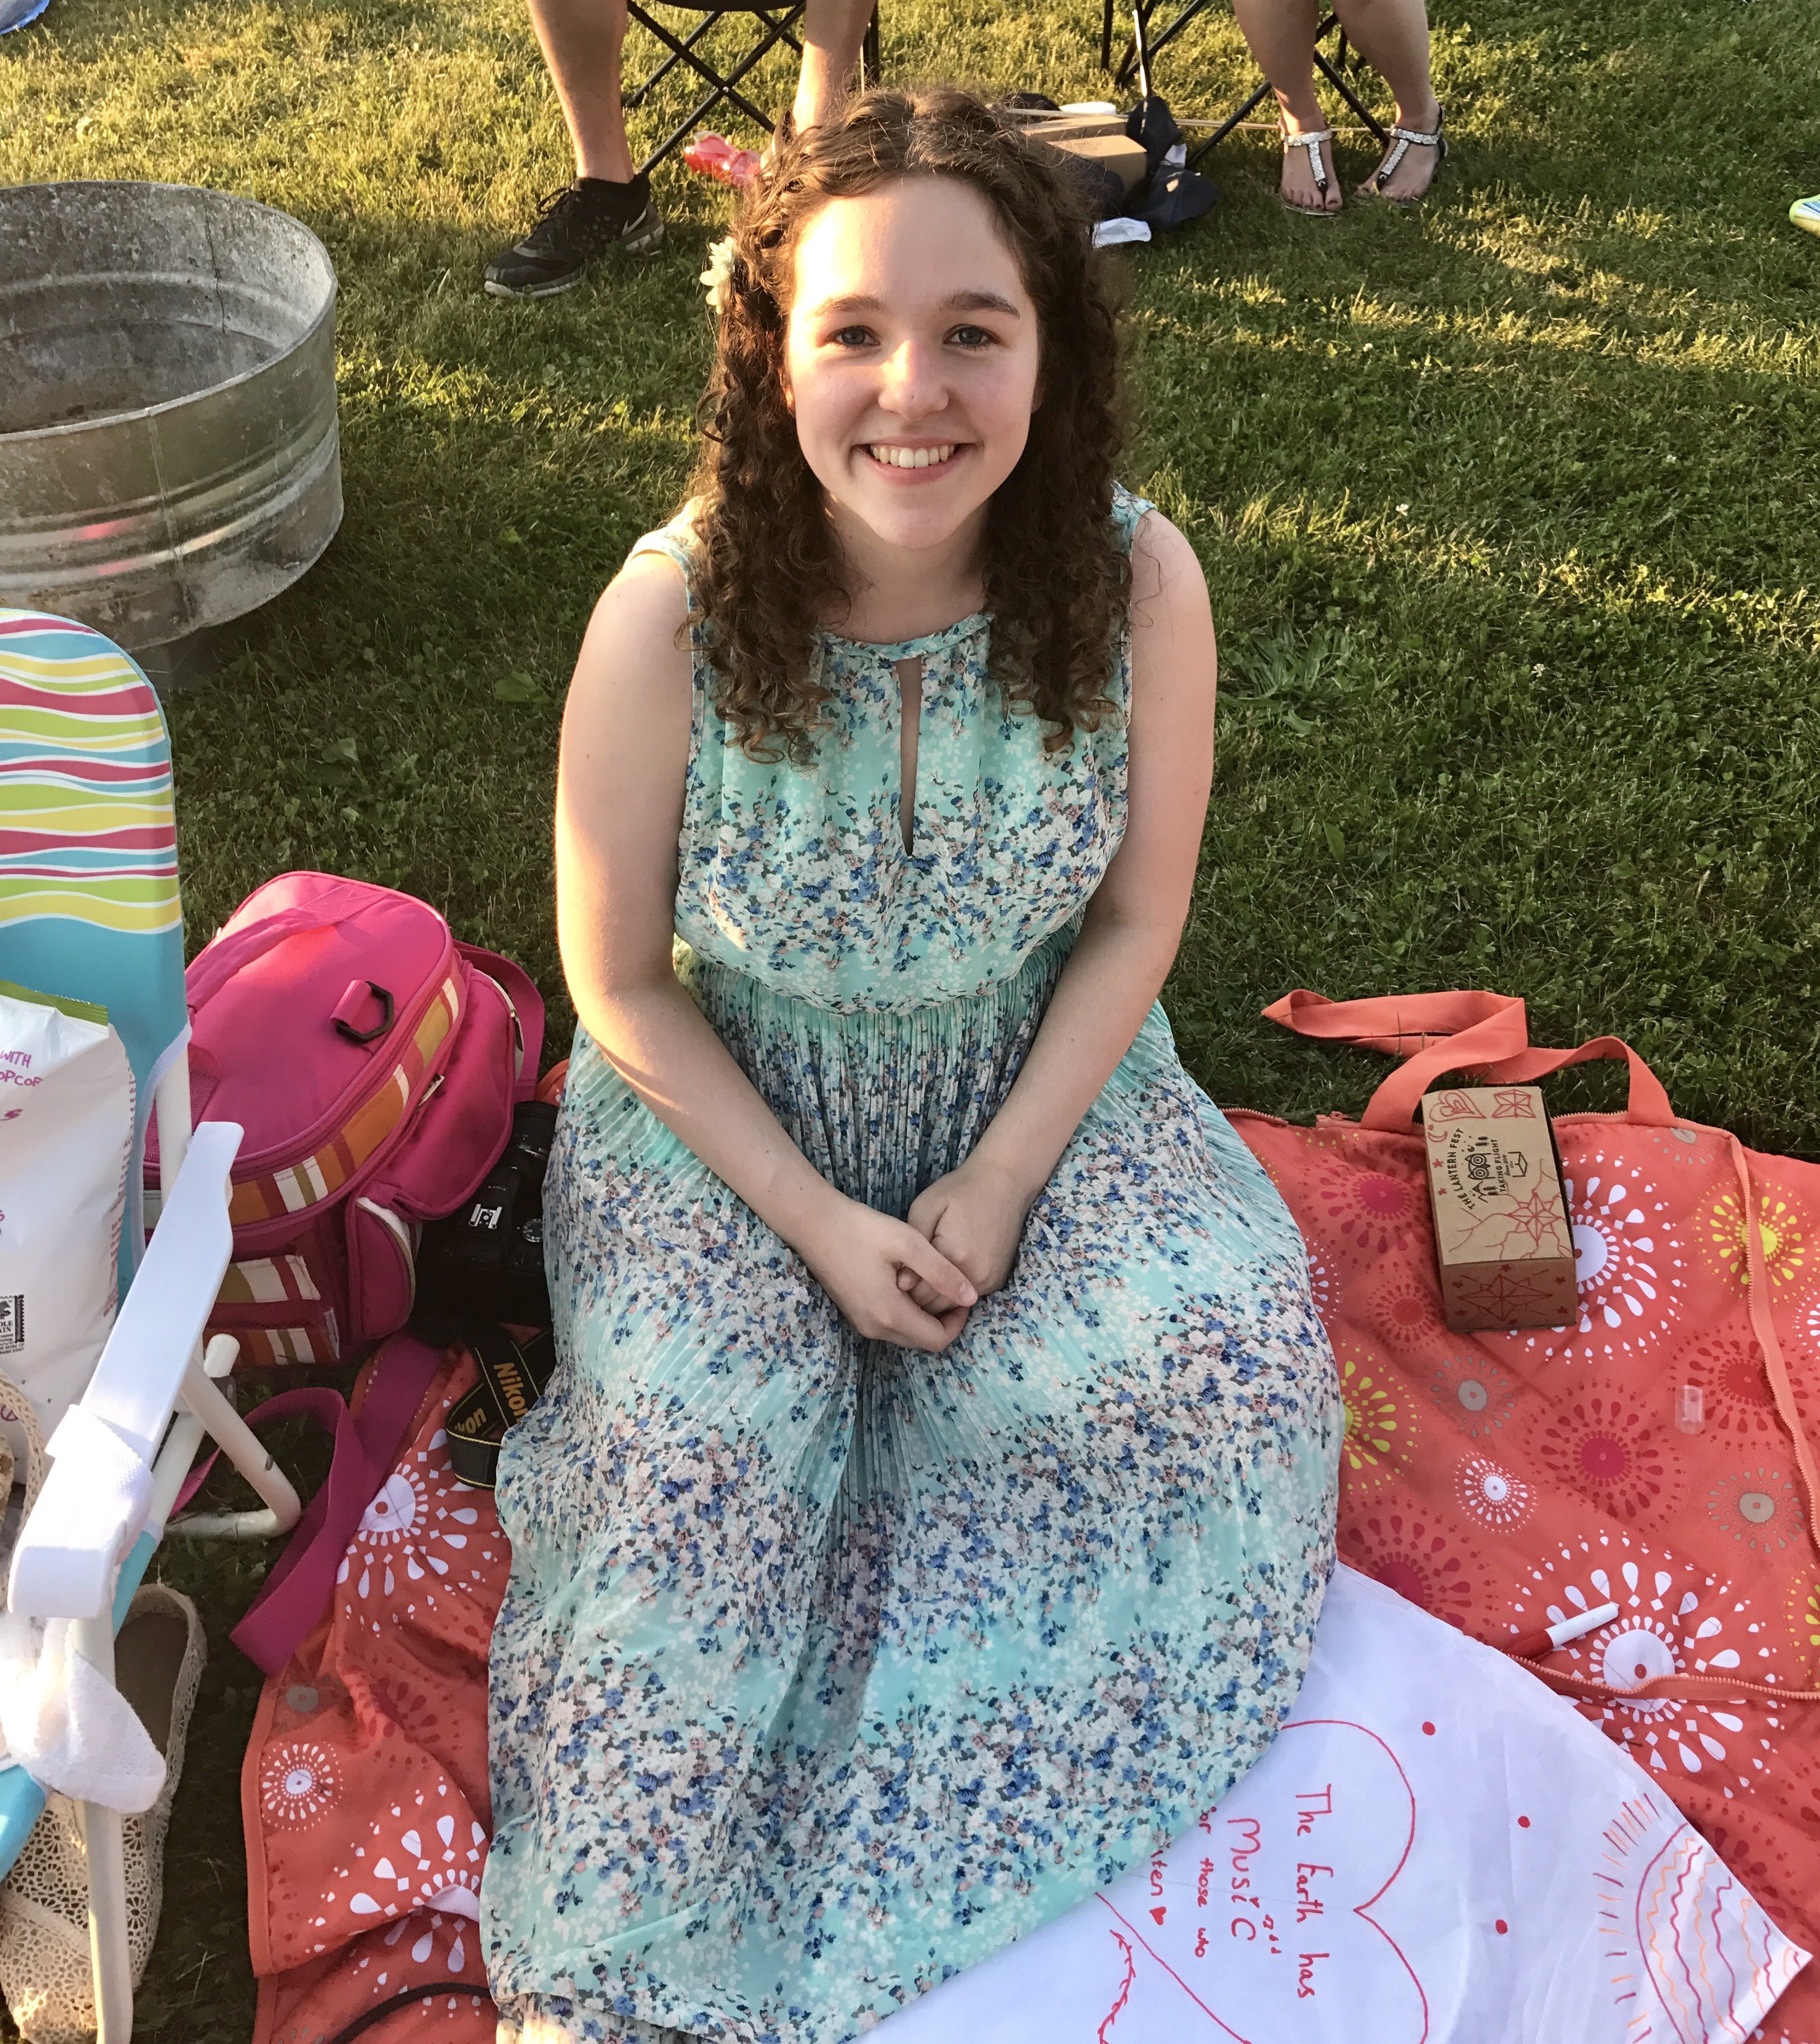 Student Ashley Myers relaxes on a picnic blanket.